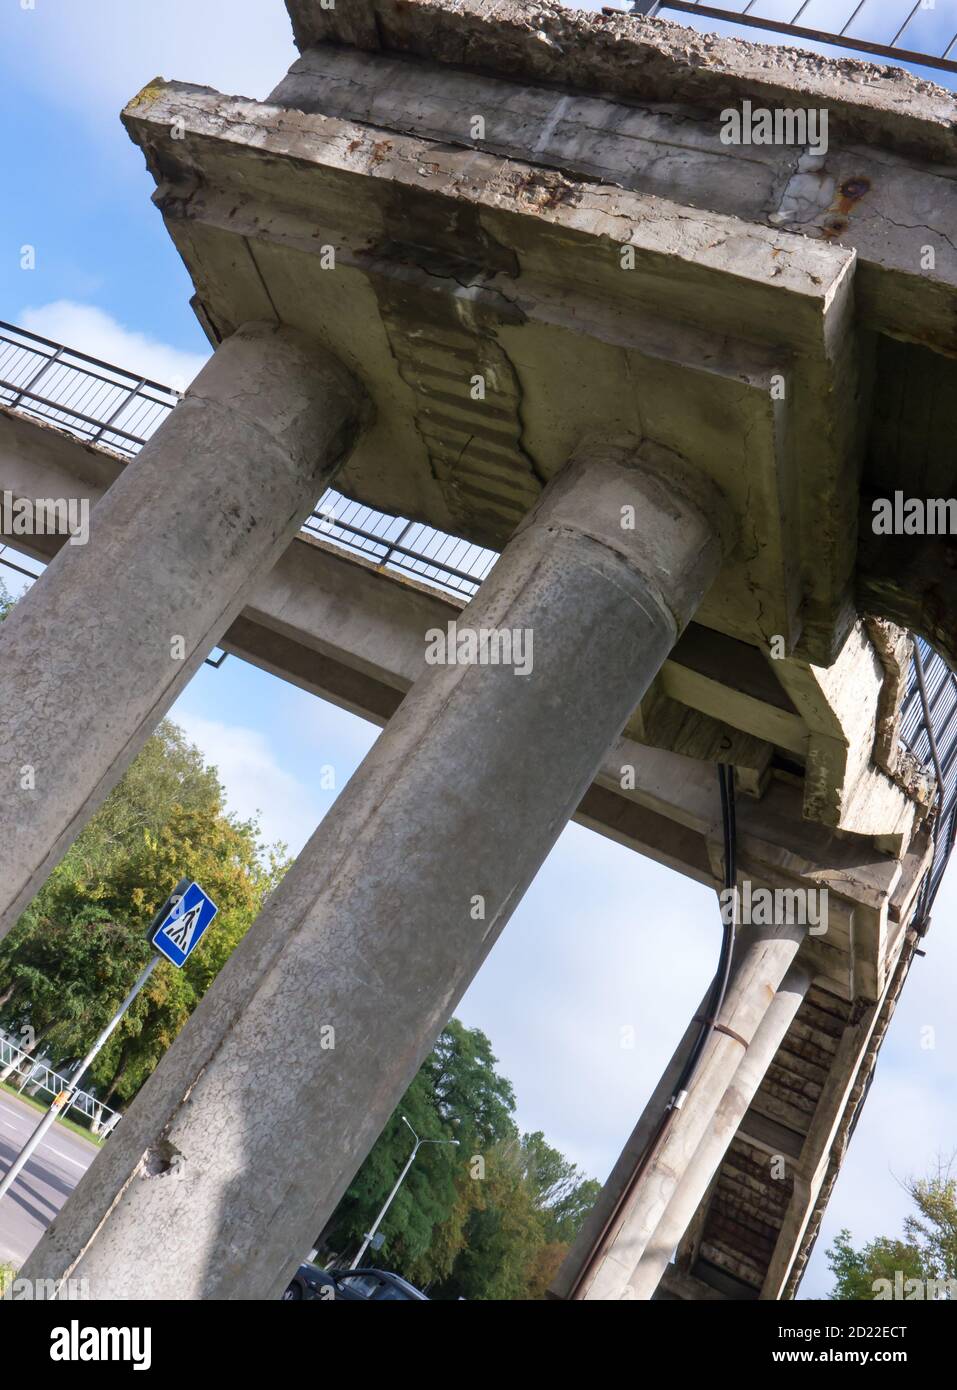 The Architecture backgrounds and objects. Constructivist style. Stock Photo